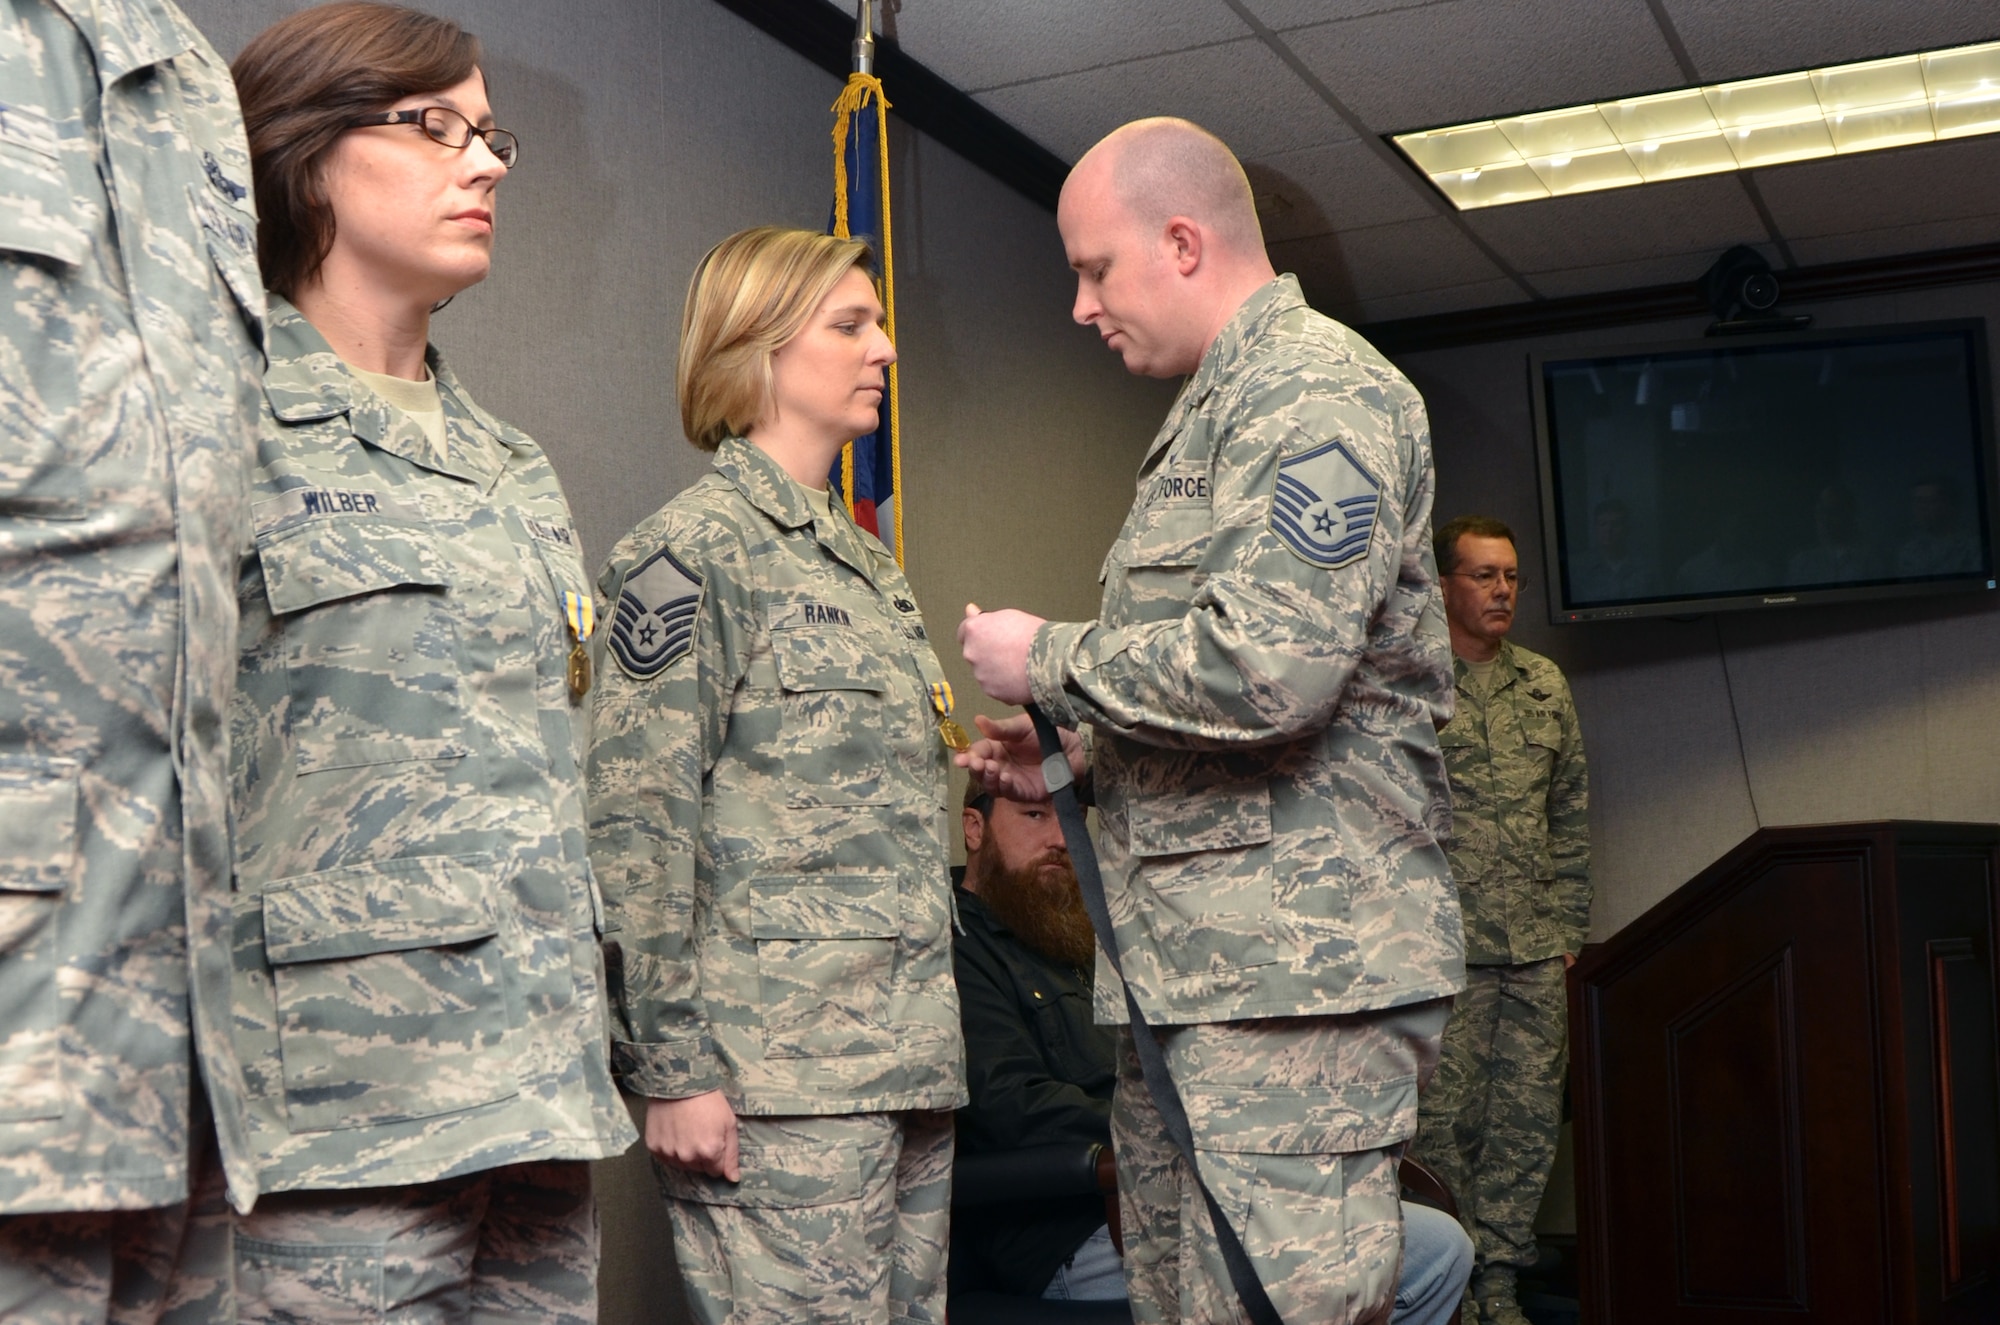 U.S. Air Force Master Sgt. Tracie Rankin, 1st Sergeant for the 145th Mission Support Group, receives Air Force Commendation Medal, as she is recognized for her contributions as Family Liaison Officer to MAFFS 7 survivor, Master Sgt. Josh Marlowe, loadmaster for the 156th Airlift Squadron.  Marlowe pins medal onto Rankin during an emotional ceremony held at the North Carolina Air National Guard base, Charlotte-Douglas Intl. airport, January 11, 2014. (Air National Guard photo by Master Sgt. Patricia F. Moran, 145th Public Affairs/Released)